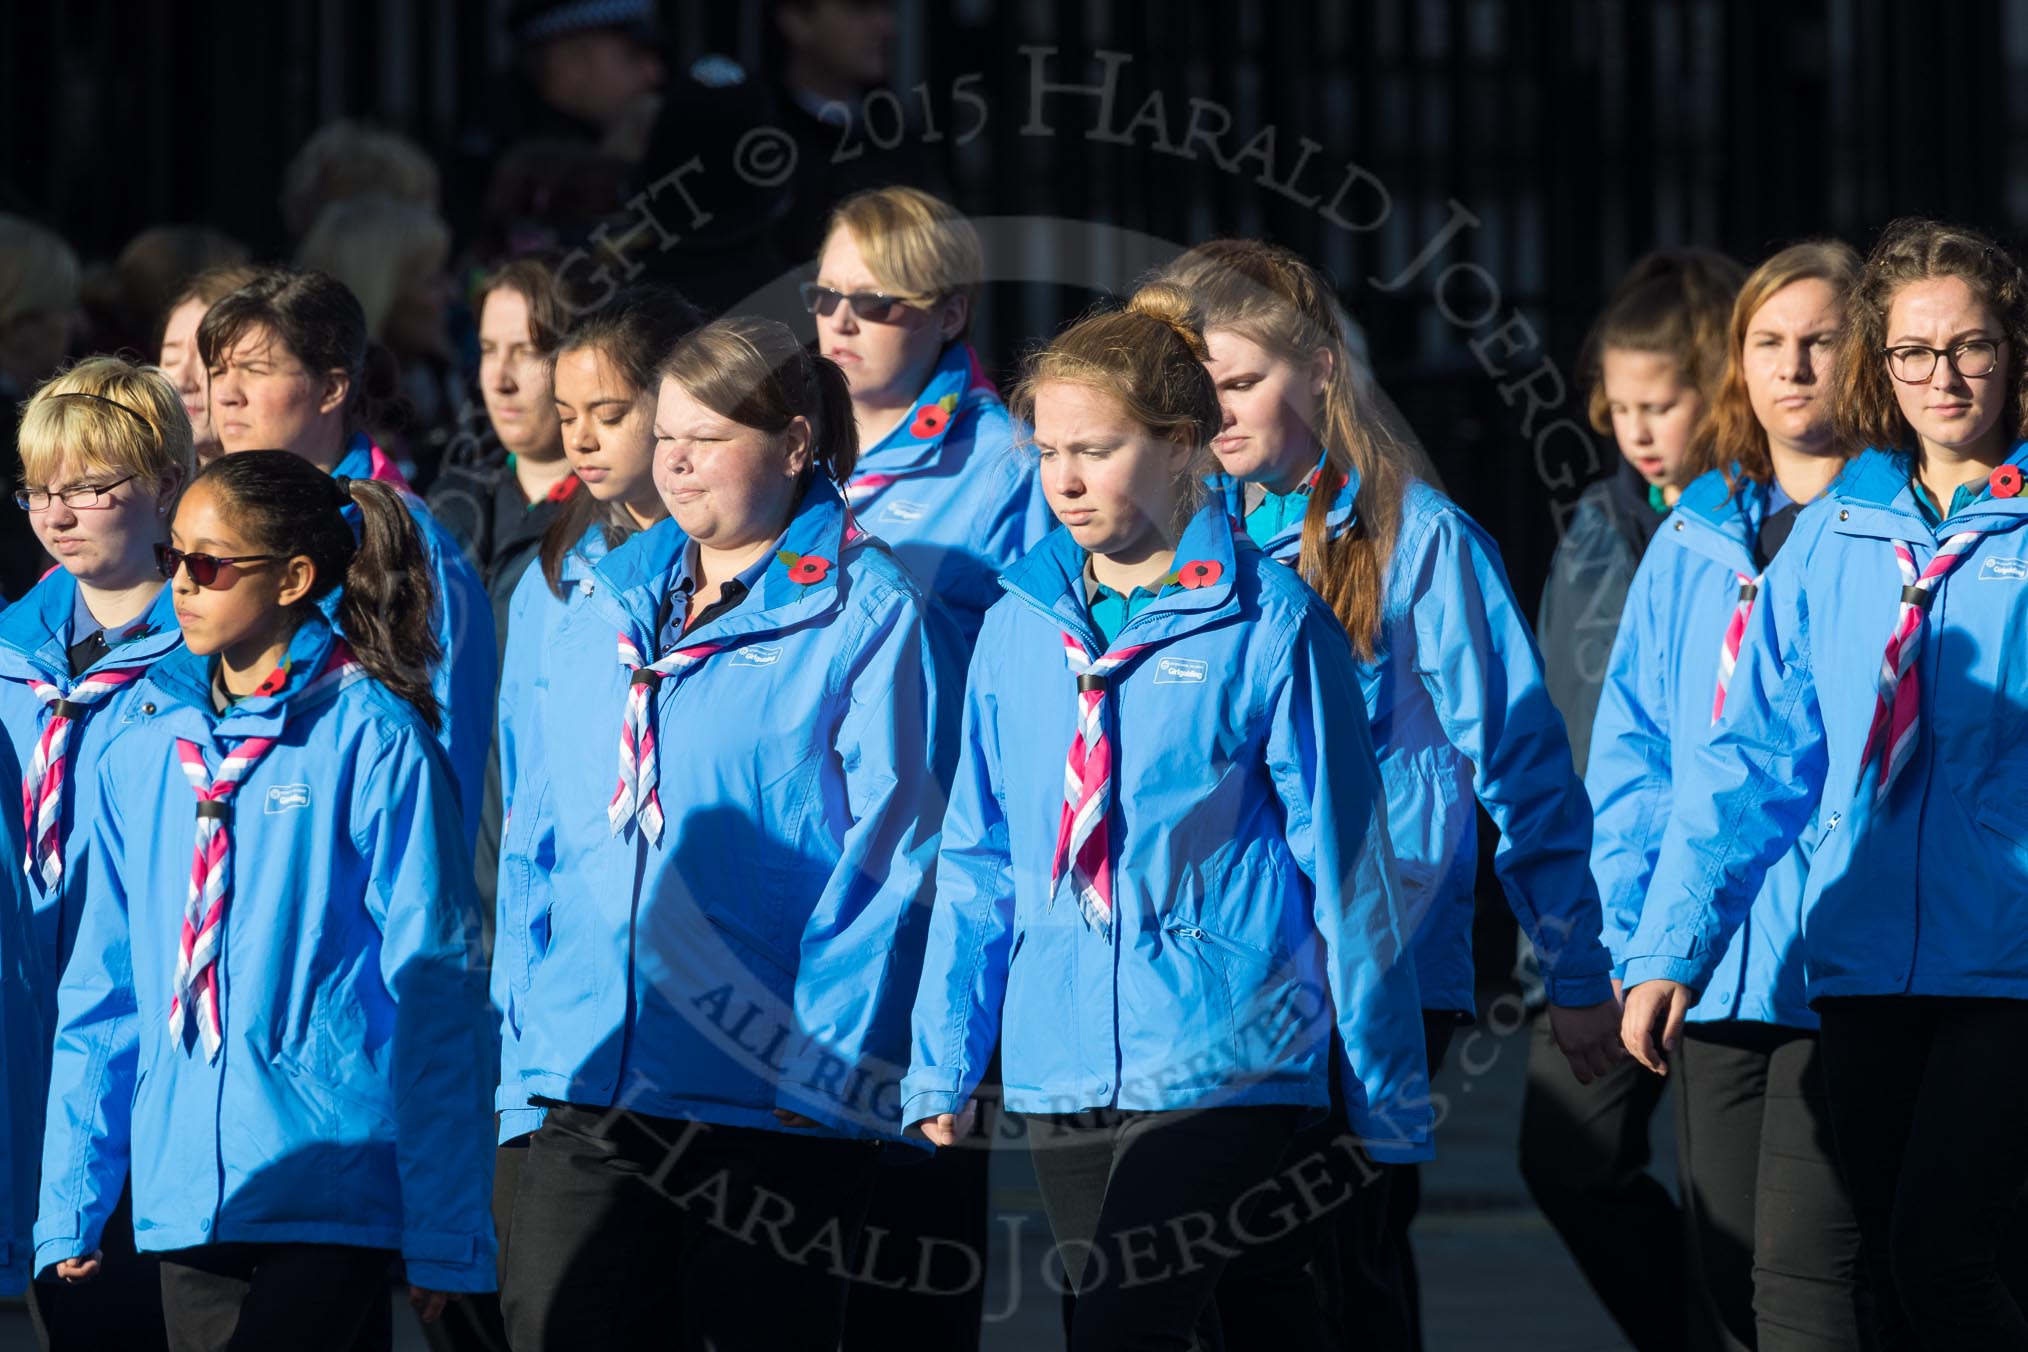 March Past, Remembrance Sunday at the Cenotaph 2016: M34 Girlguiding UK.
Cenotaph, Whitehall, London SW1,
London,
Greater London,
United Kingdom,
on 13 November 2016 at 13:18, image #2859